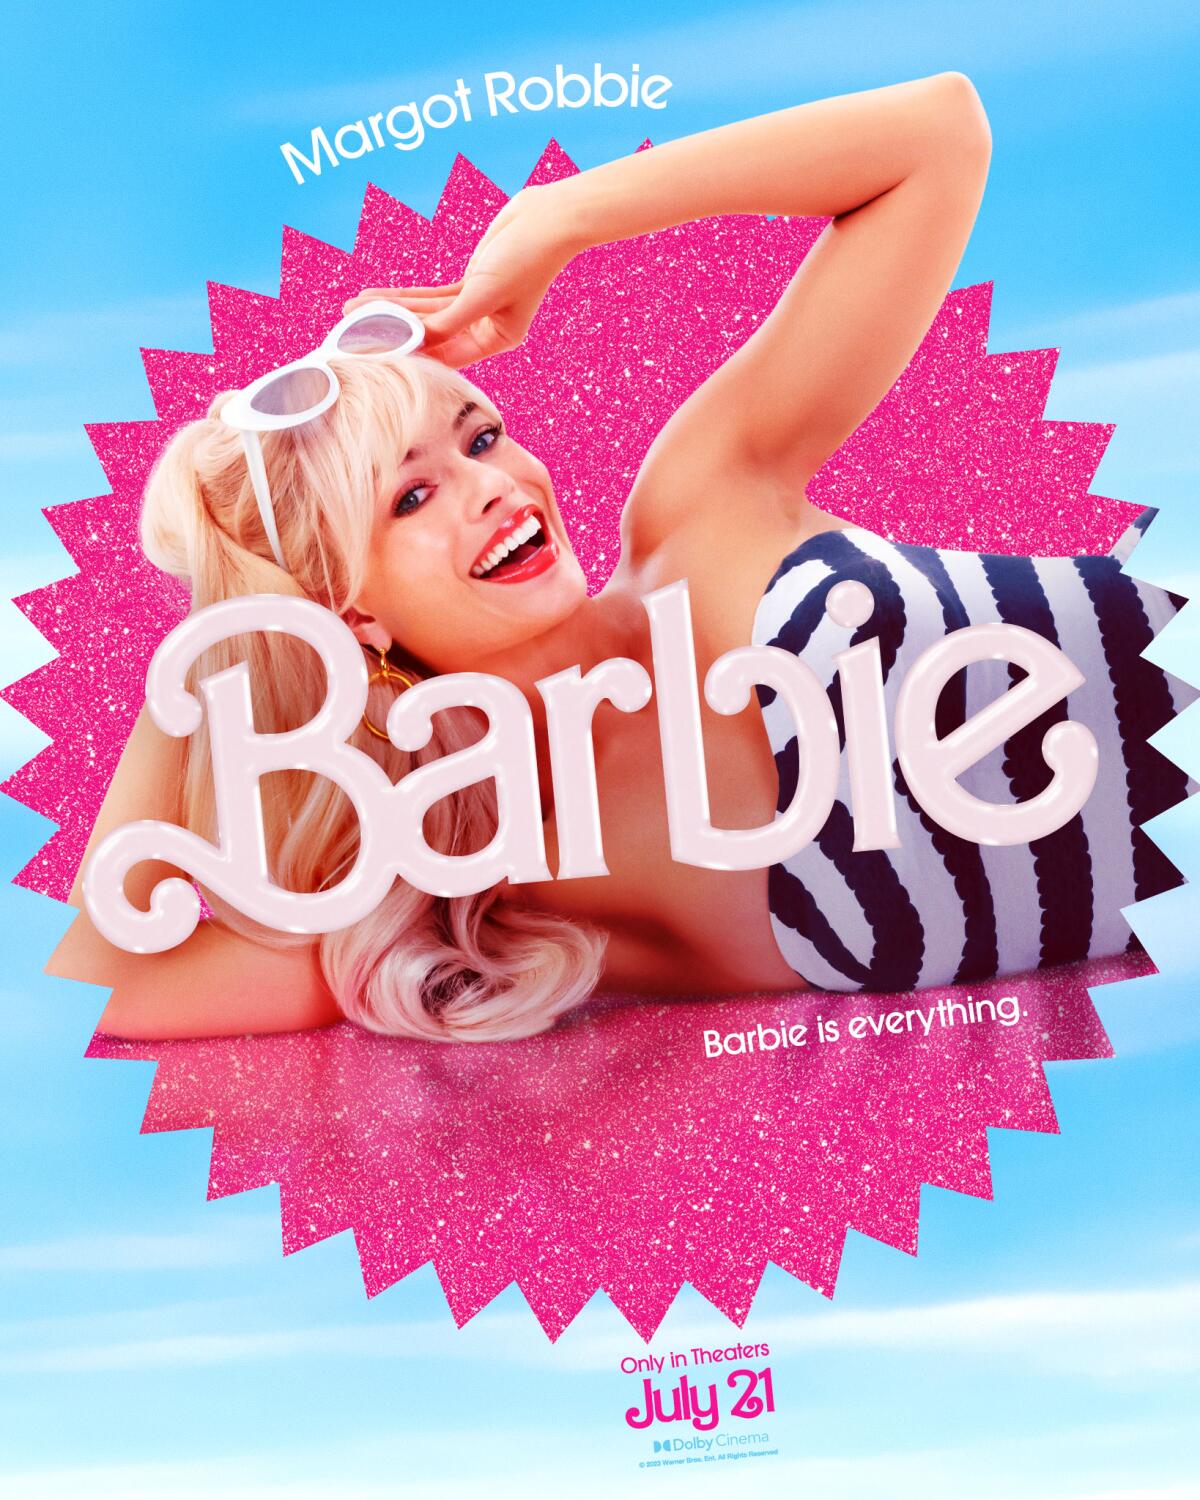 Margot Robbie lounges in a "Barbie" movie poster. She wears a black-and-white striped swimsuit and white sunglasses.